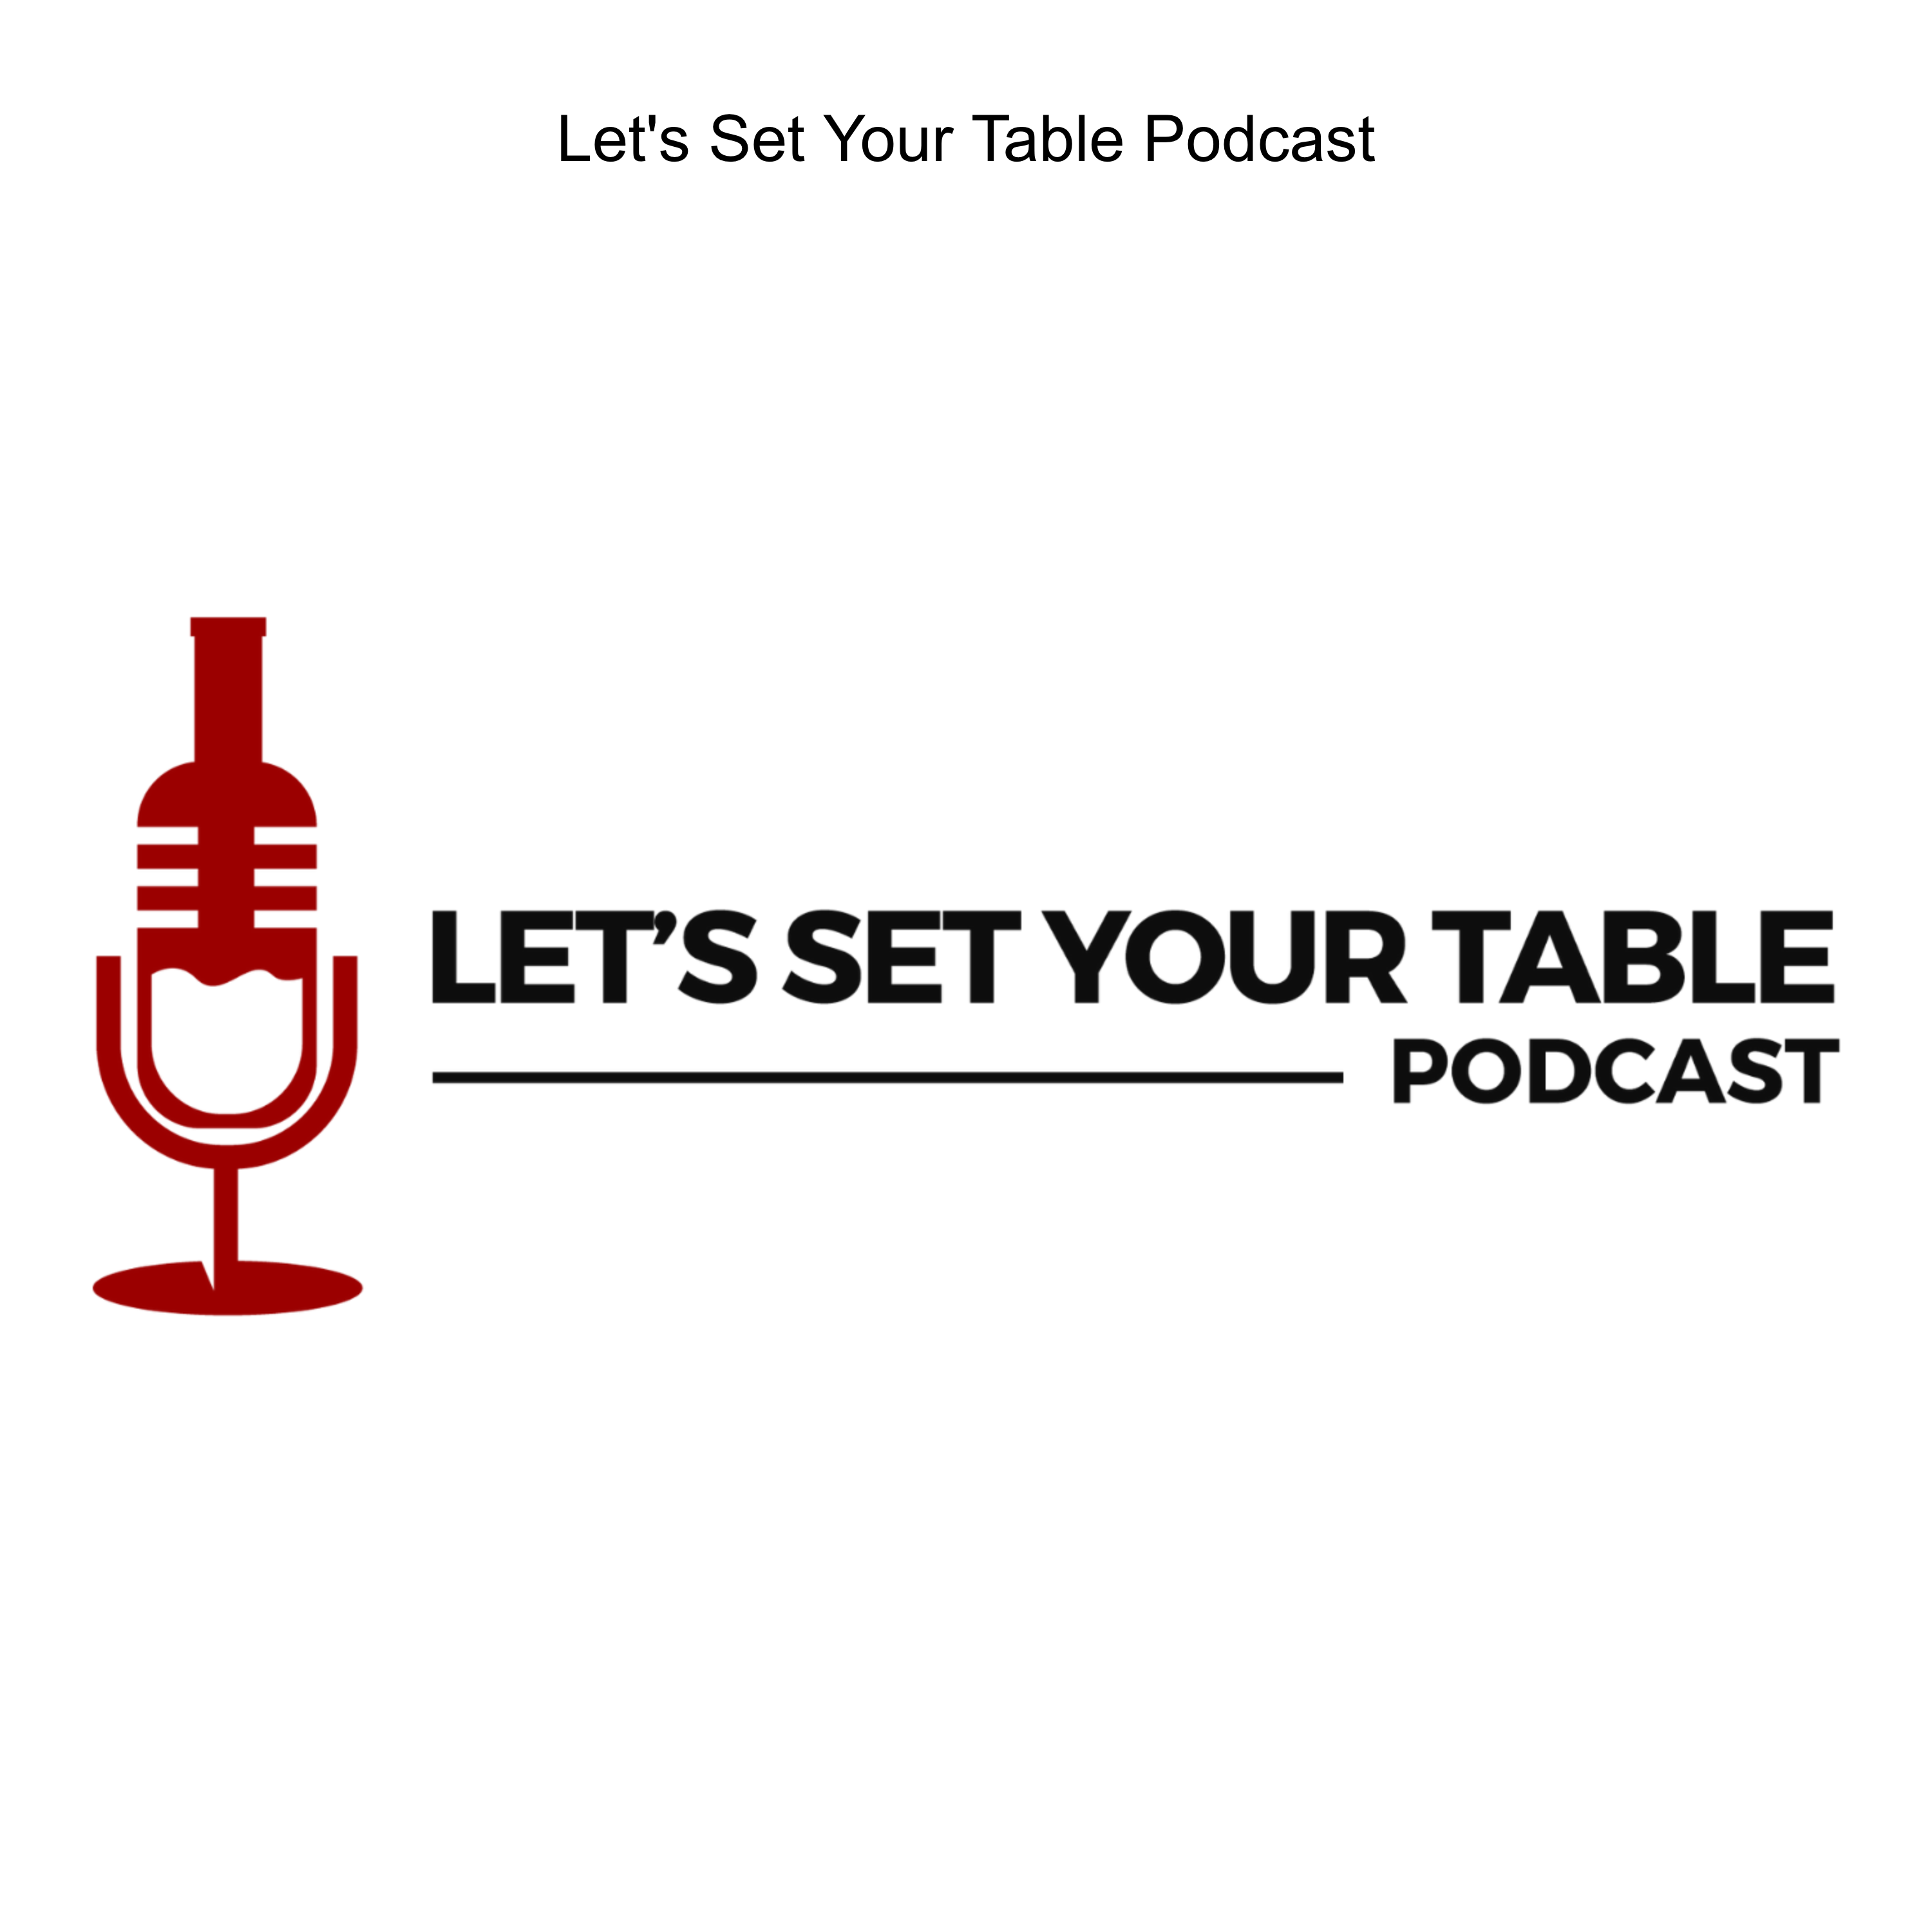 Let’s Set Your Table Podcast